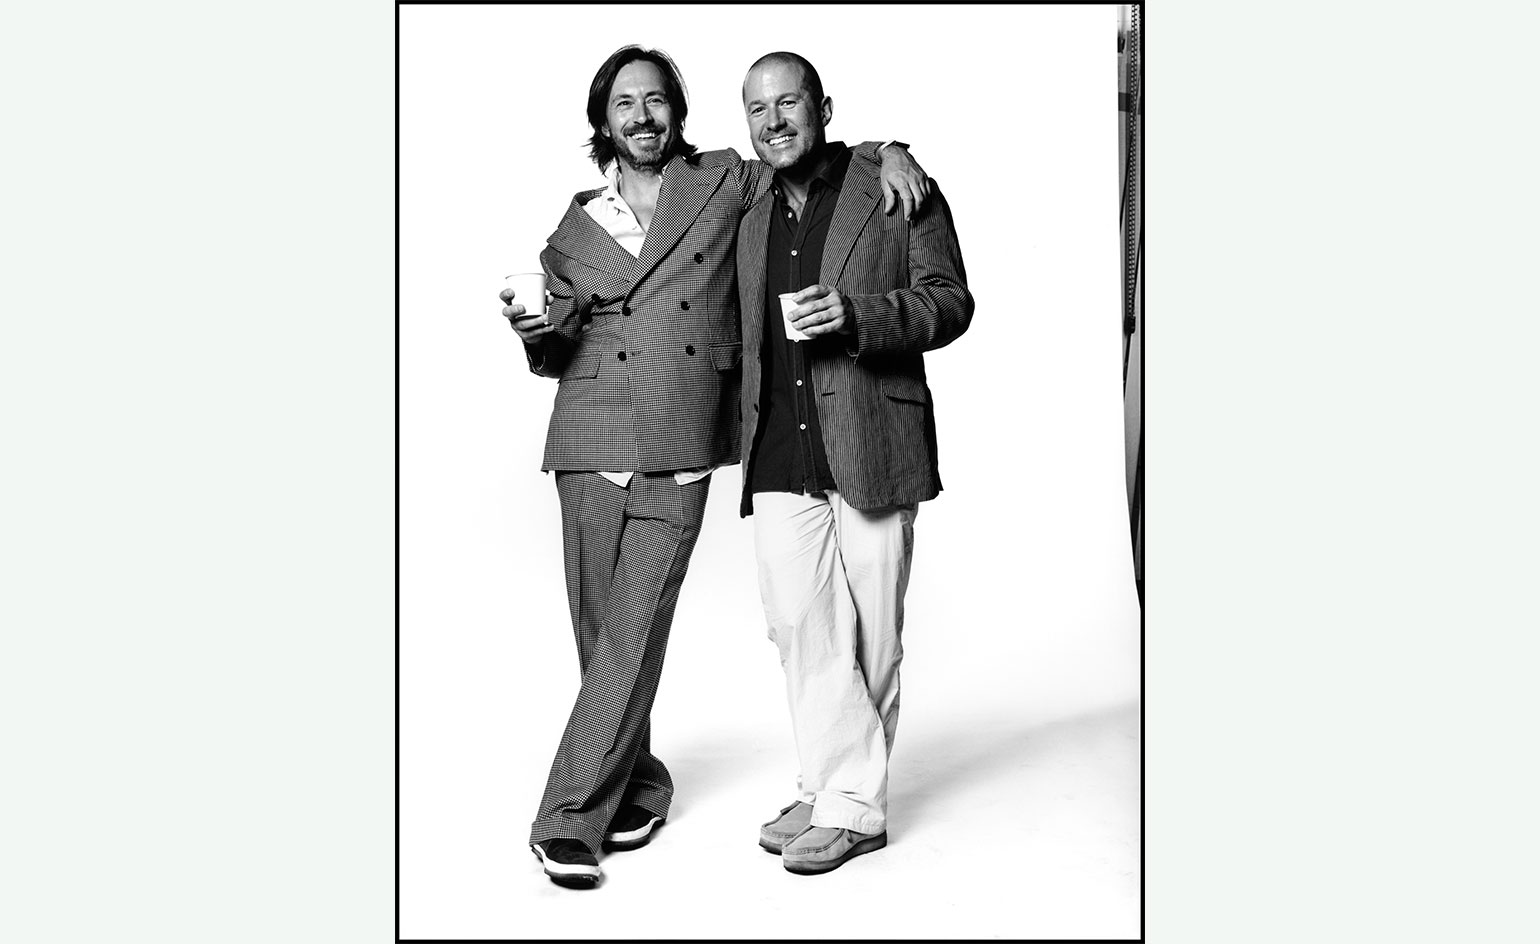 About Marc Newson - Discovering Designers